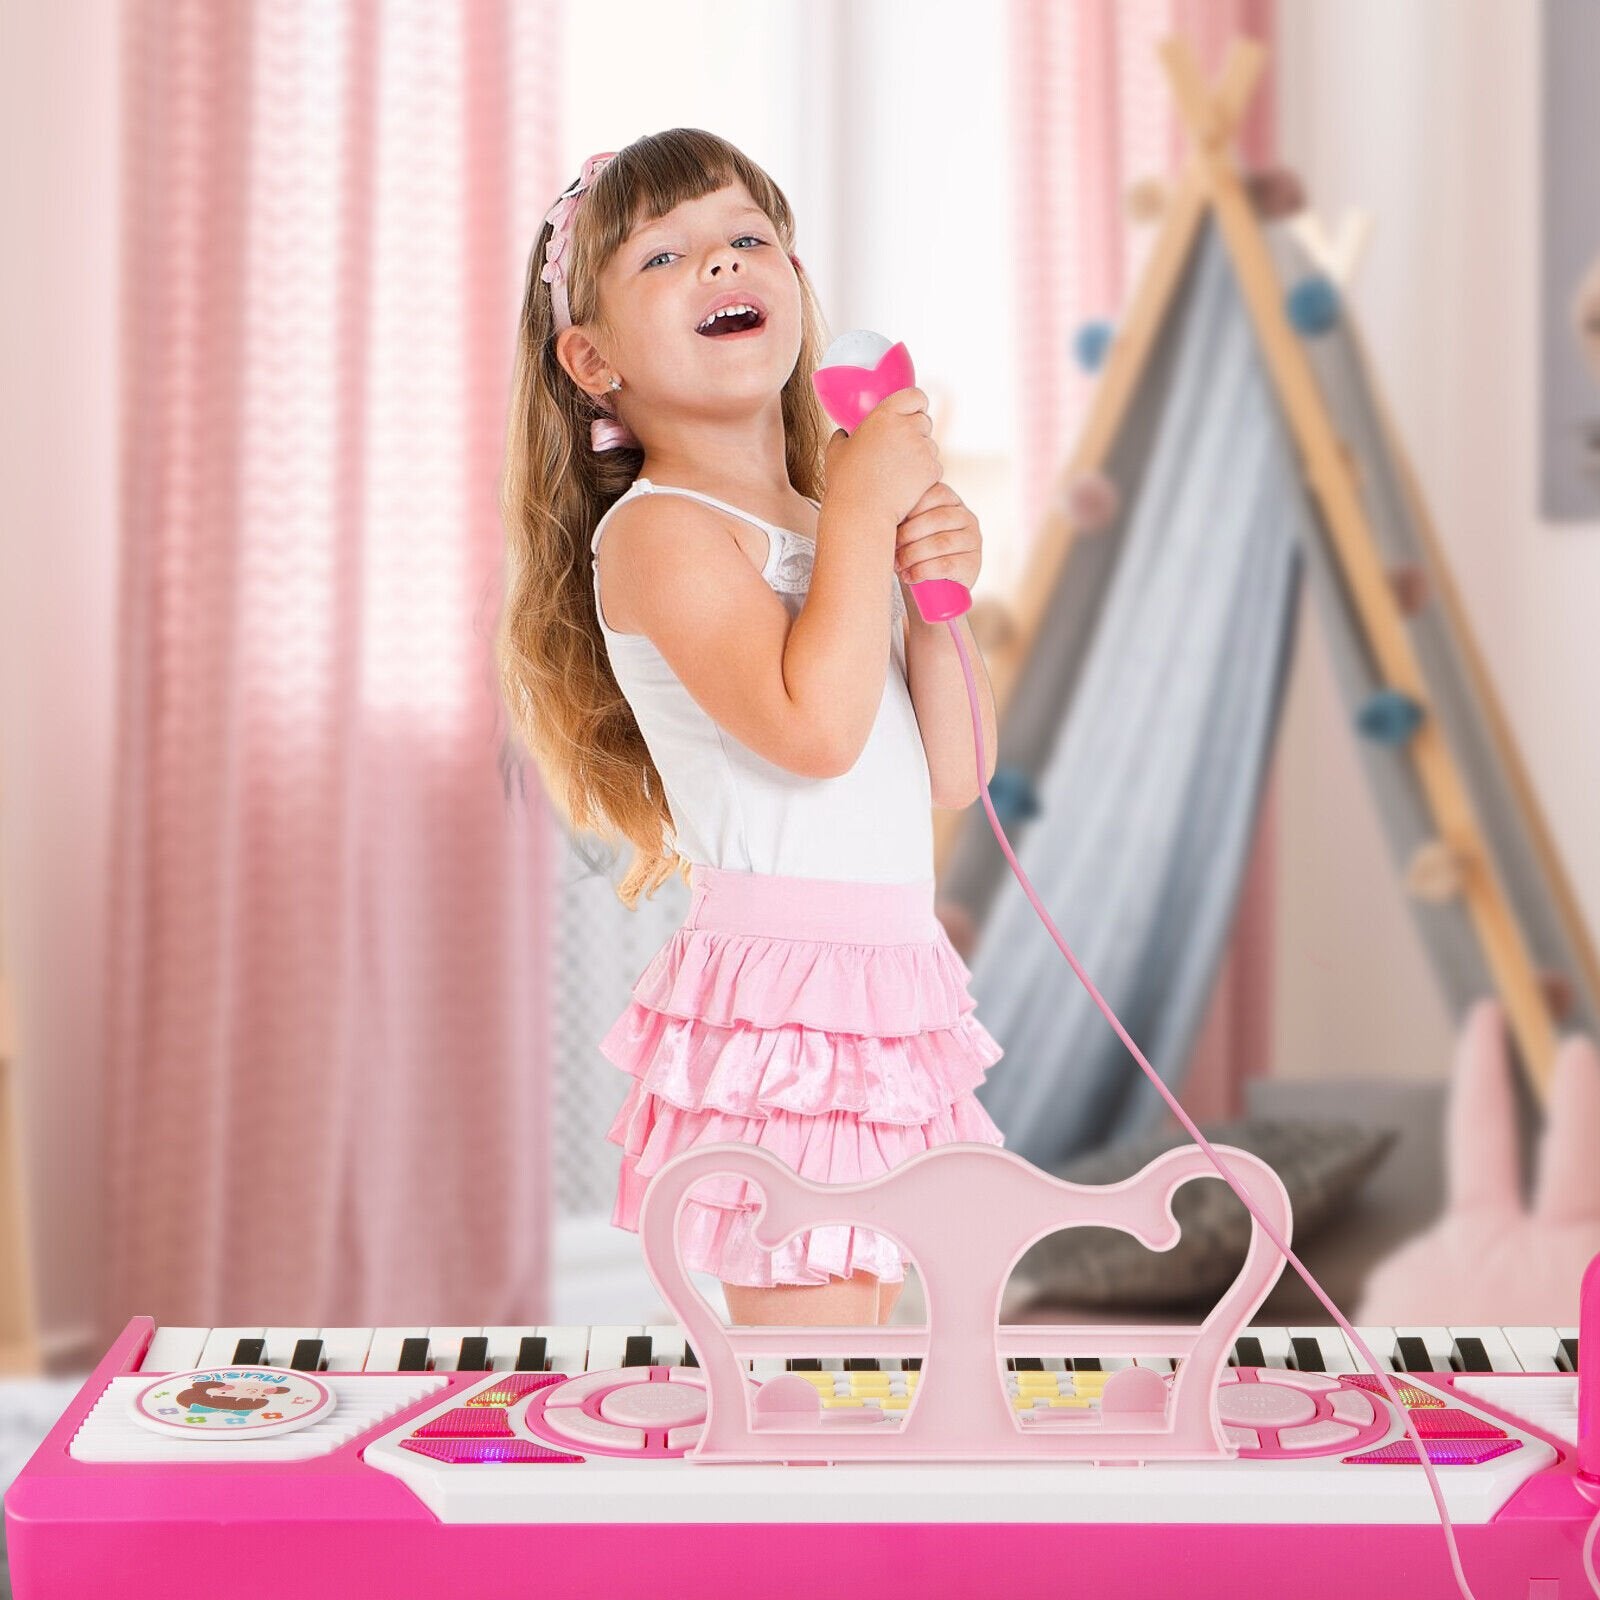 49 Keys Kids Piano Keyboard for Kids 3+, Pink at Gallery Canada